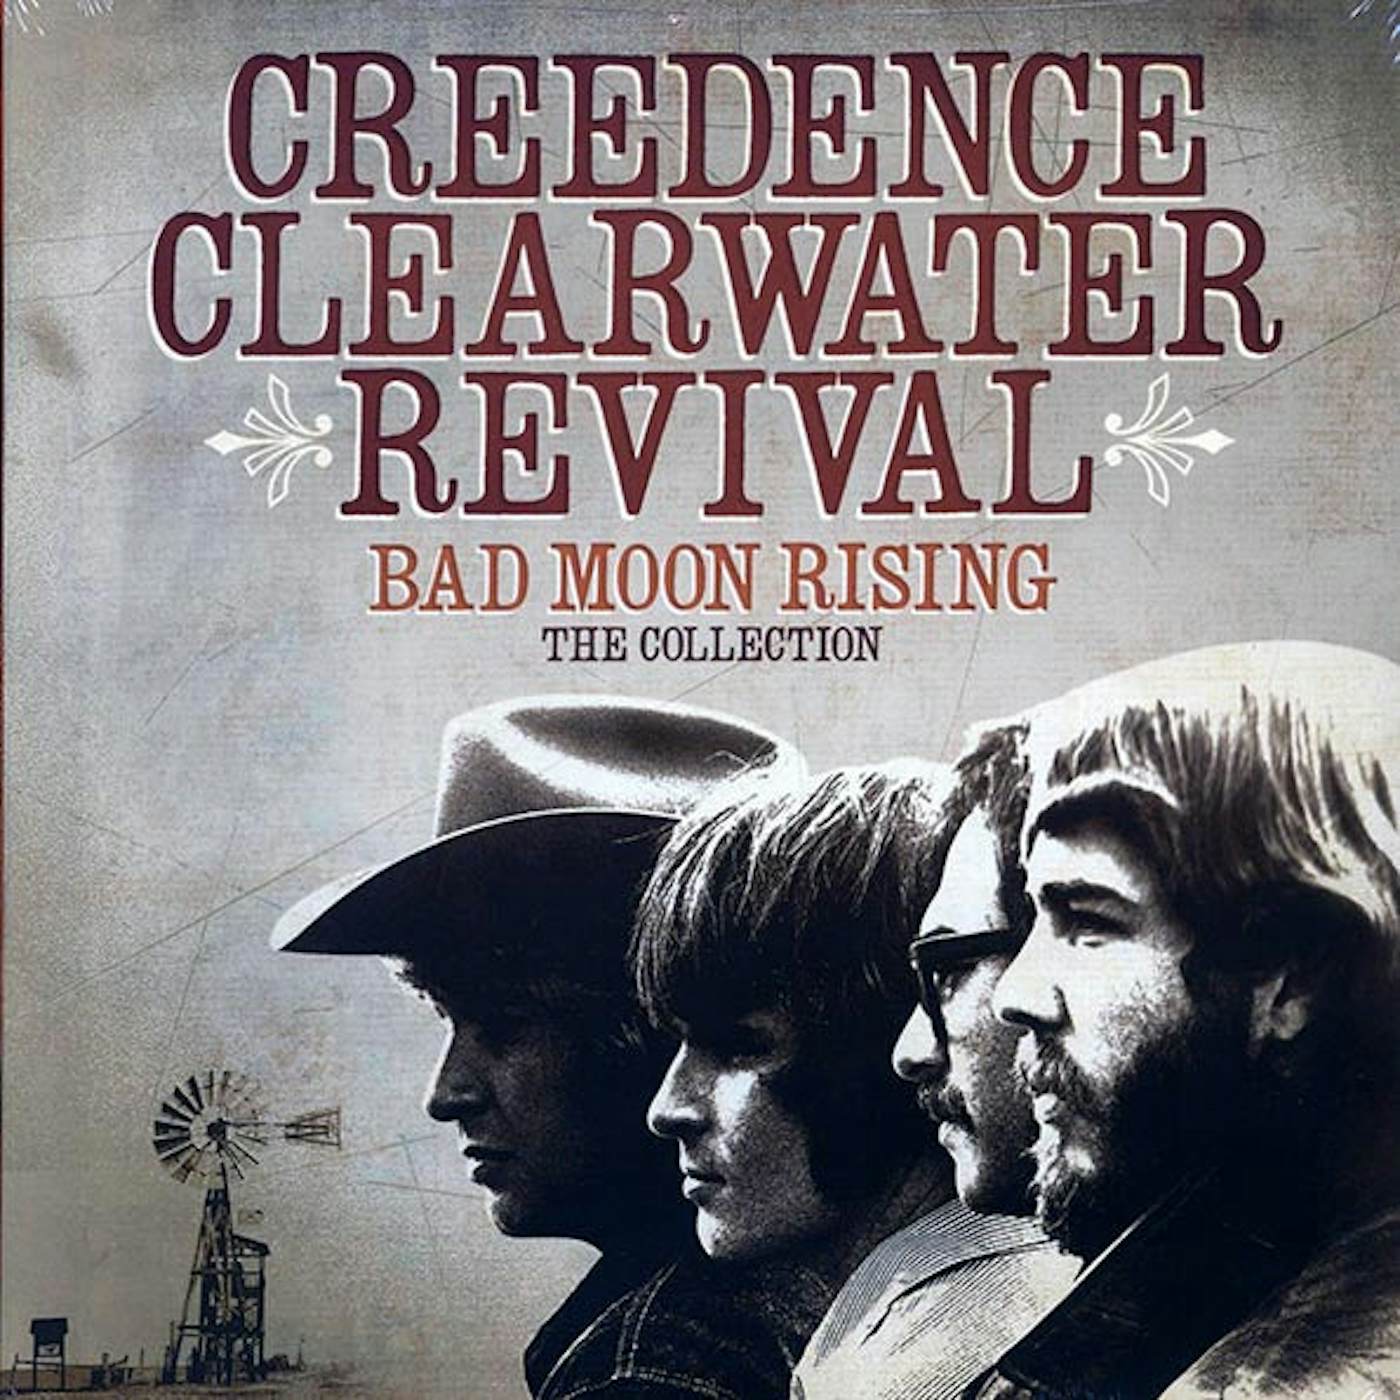 Creedence Clearwater Revival  LP -  Bad Moon Rising: The Collection (Vinyl)